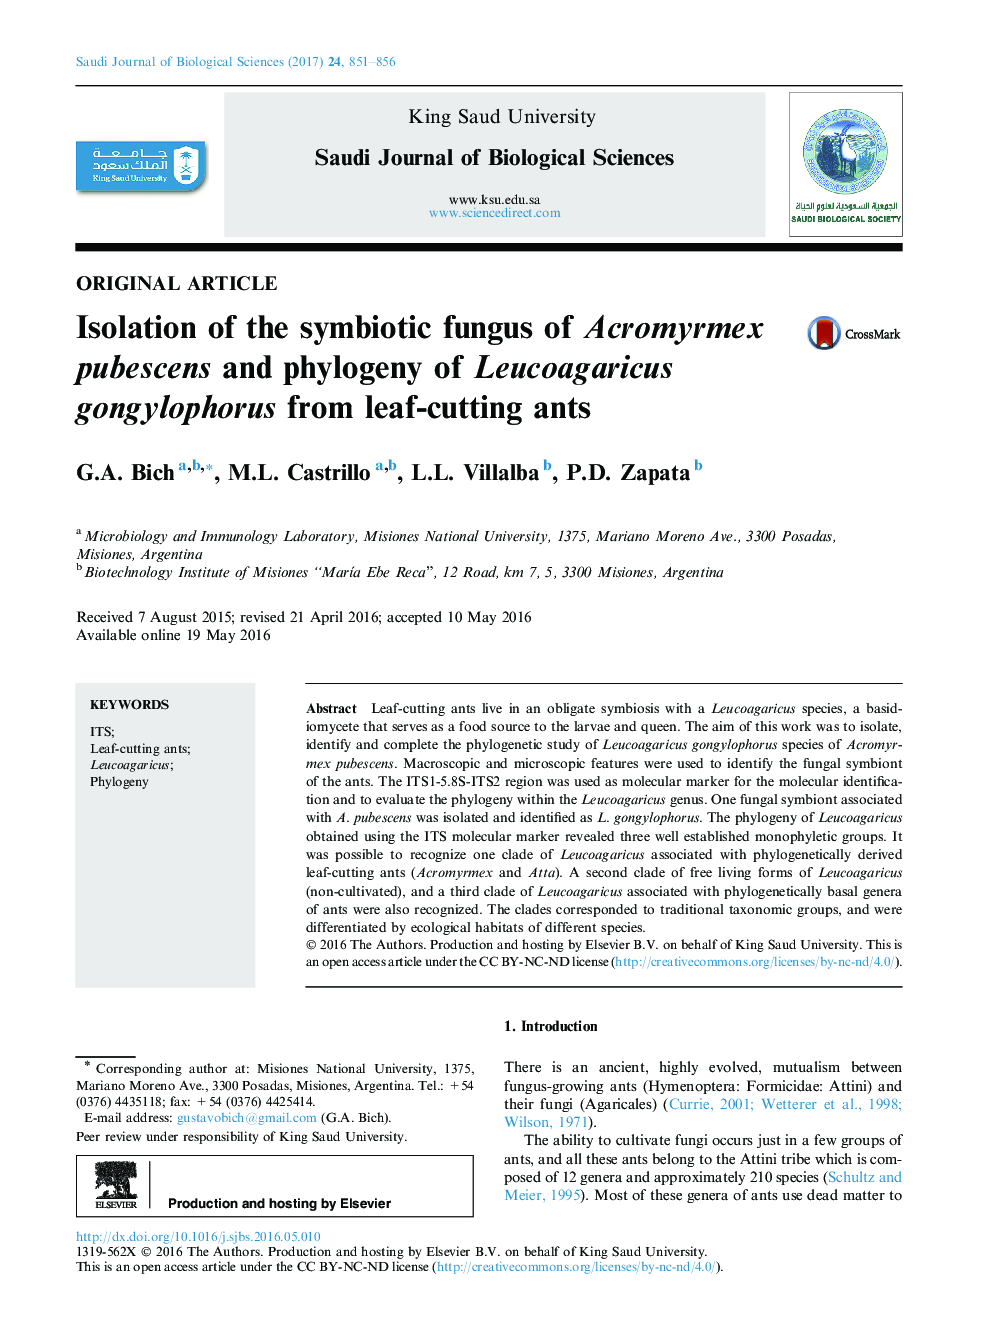 Original articleIsolation of the symbiotic fungus of Acromyrmex pubescens and phylogeny of Leucoagaricus gongylophorus from leaf-cutting ants